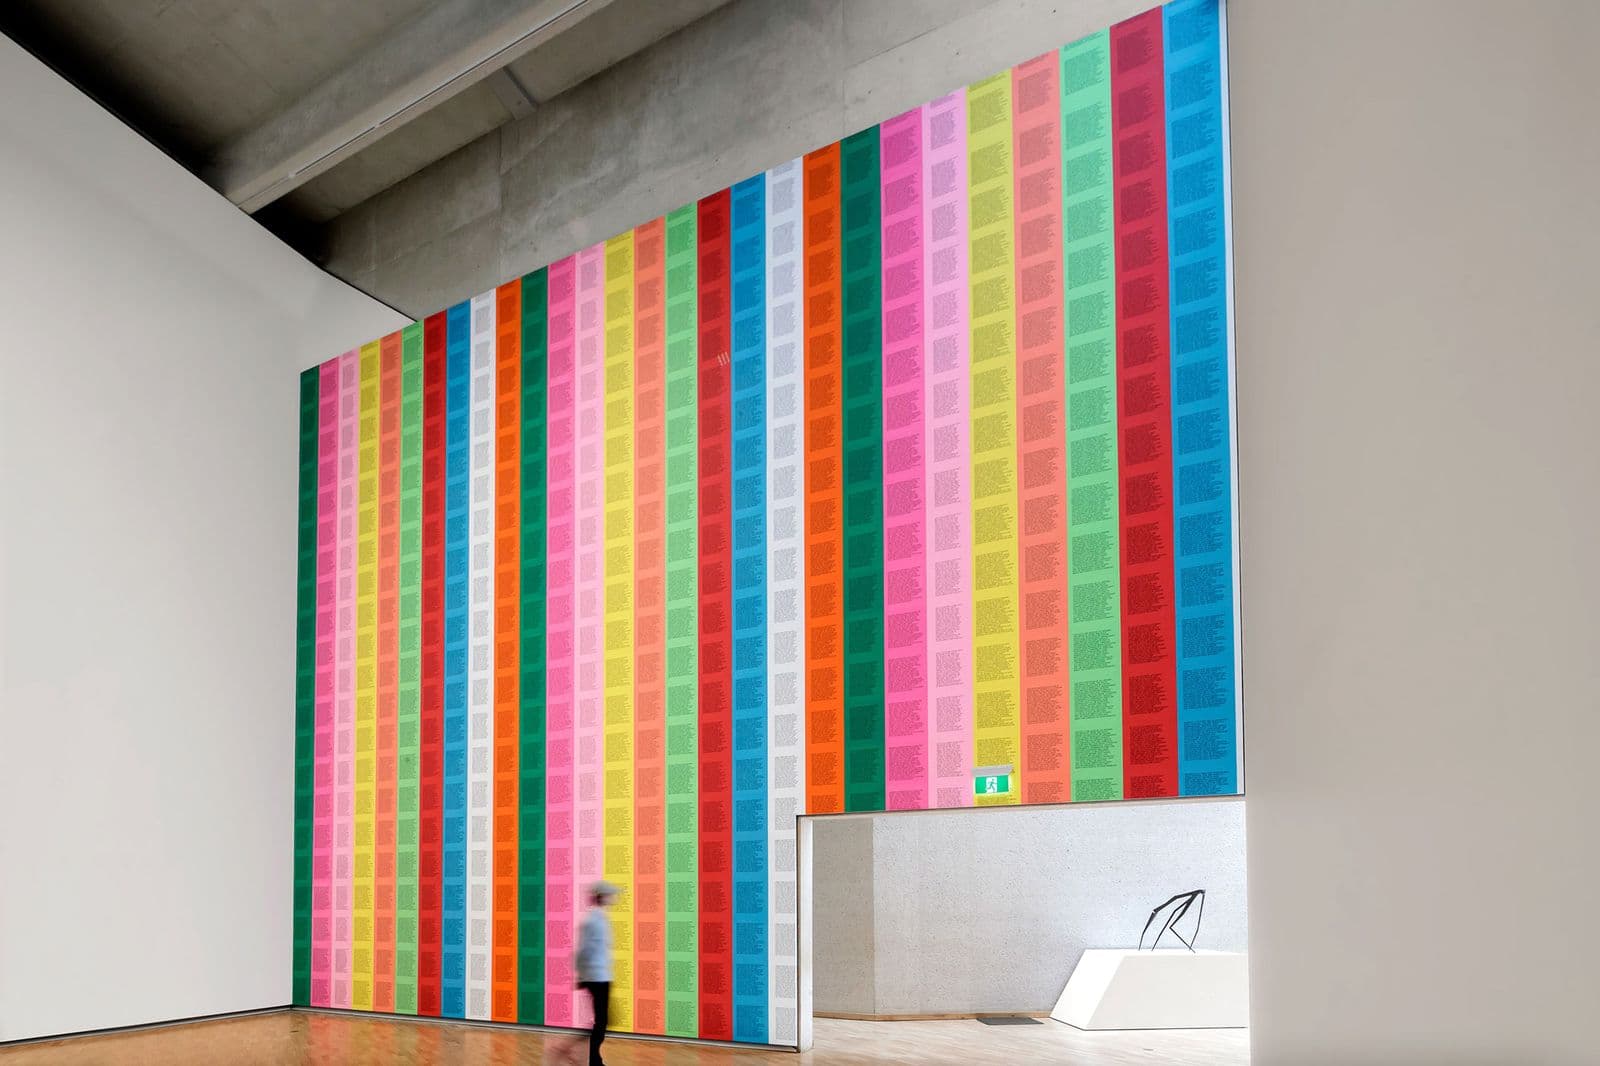 In a high-ceilinged gallery space a woman walks near a wall pasted completely with coloured squares of writing